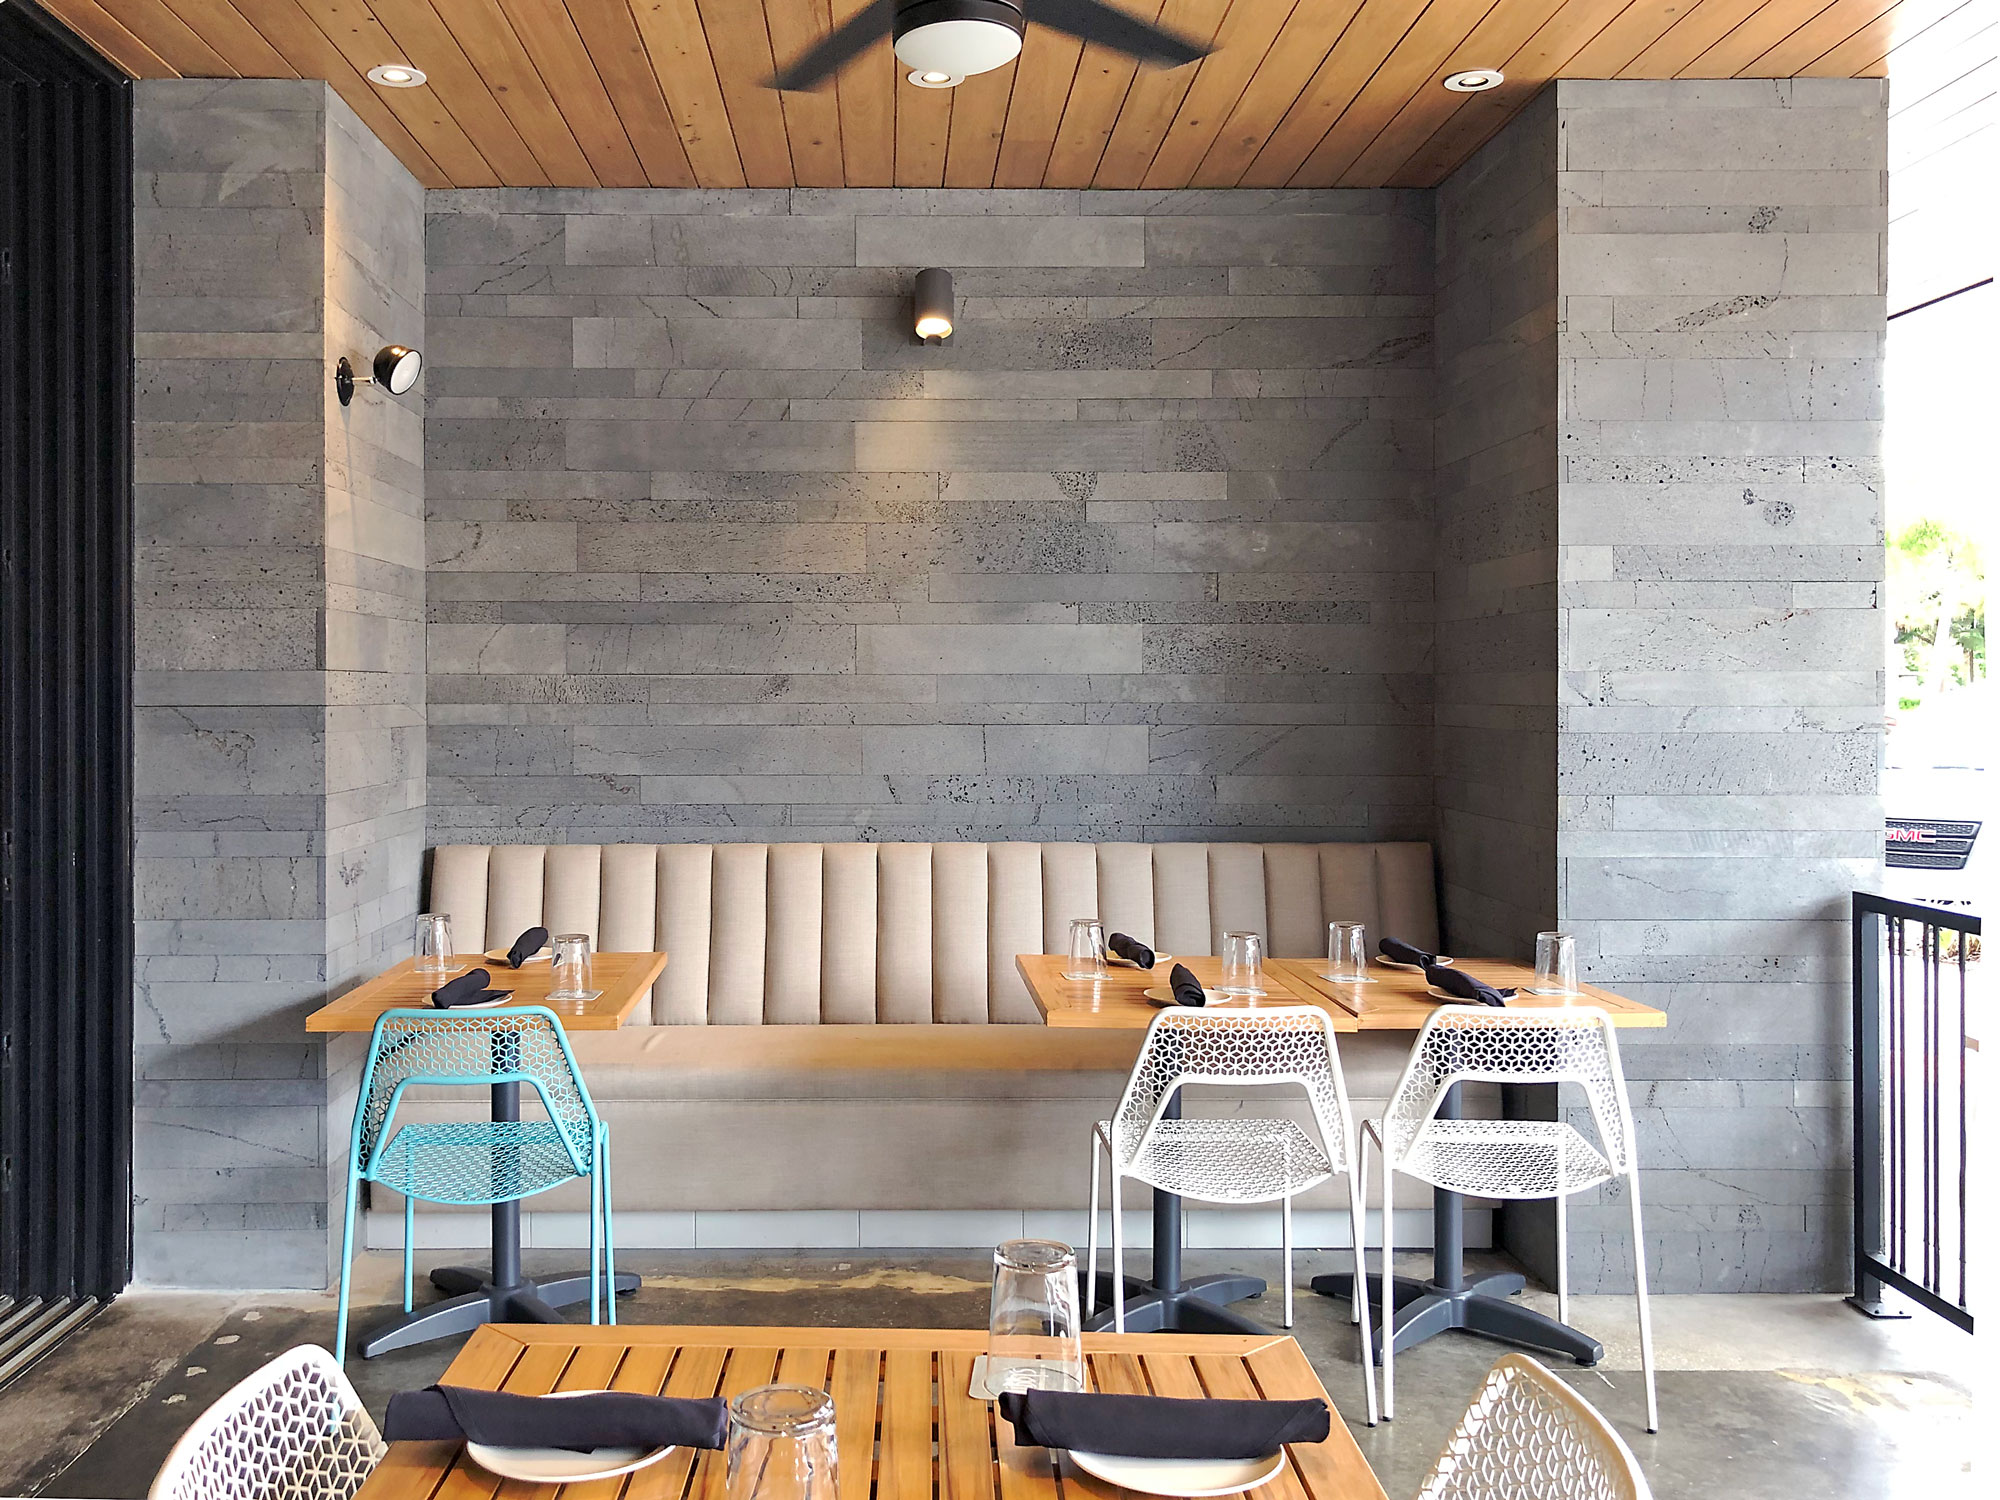 Norstone Platinum Lavastone Planc Large Format Tiles in the seating area of a casual restaurant in Florida